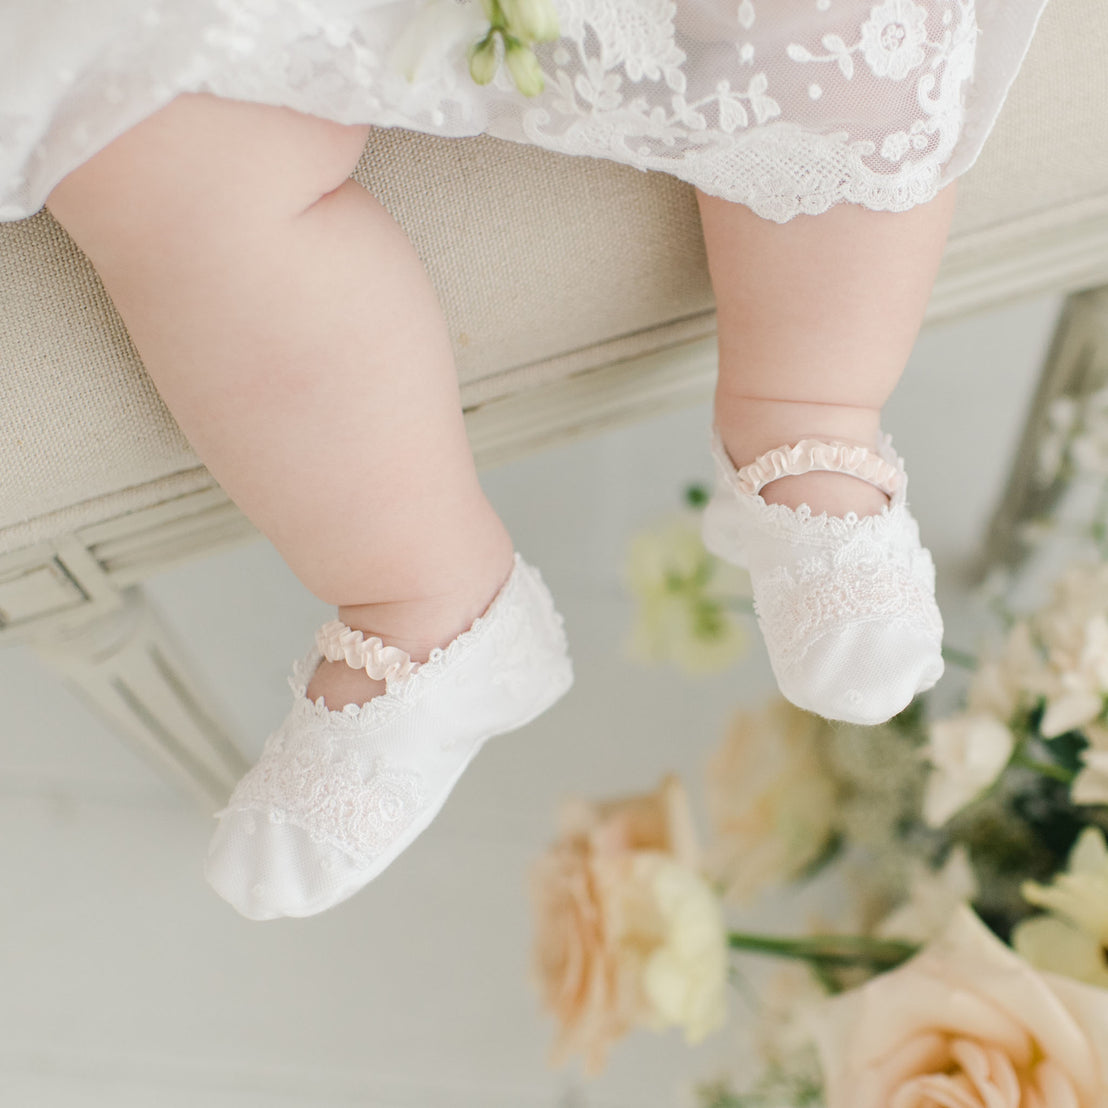 A close-up of a baby's feet adorned with the Melissa baby booties, hovering above a decorative arrangement of soft peach and cream flowers.